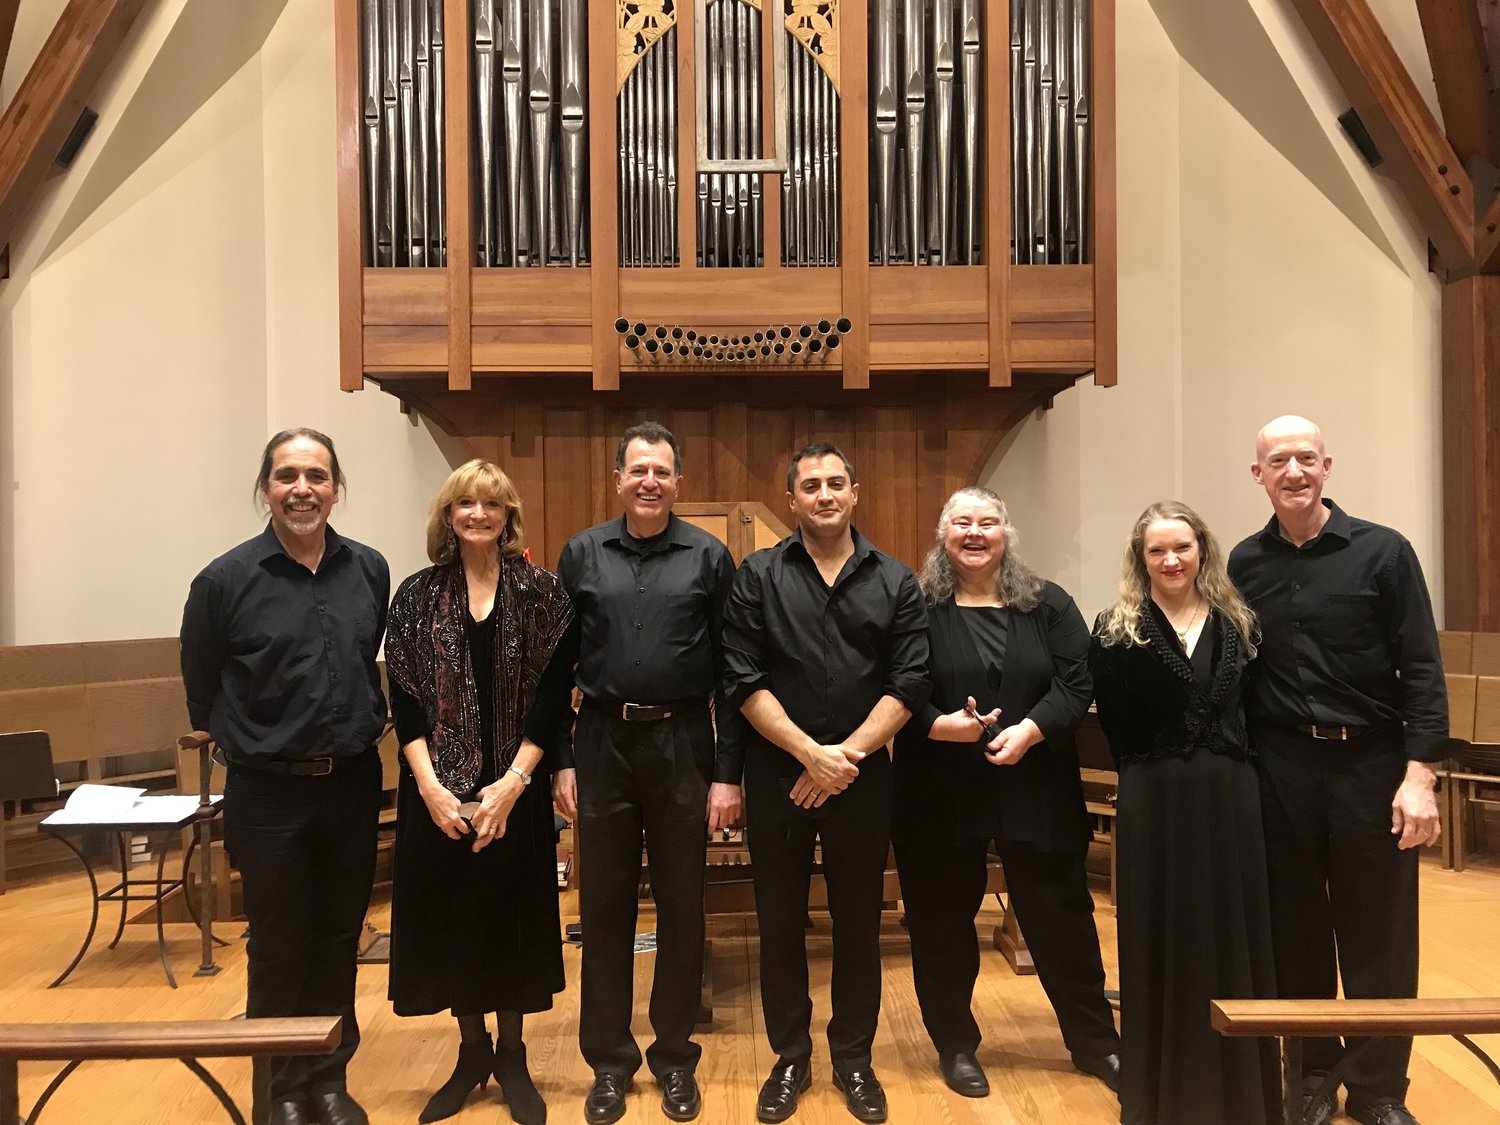 La Fiocco celebrates of Johann Sebastian Bach’s 337th birthday with concerts in Princeton, N.J., and Solebury.